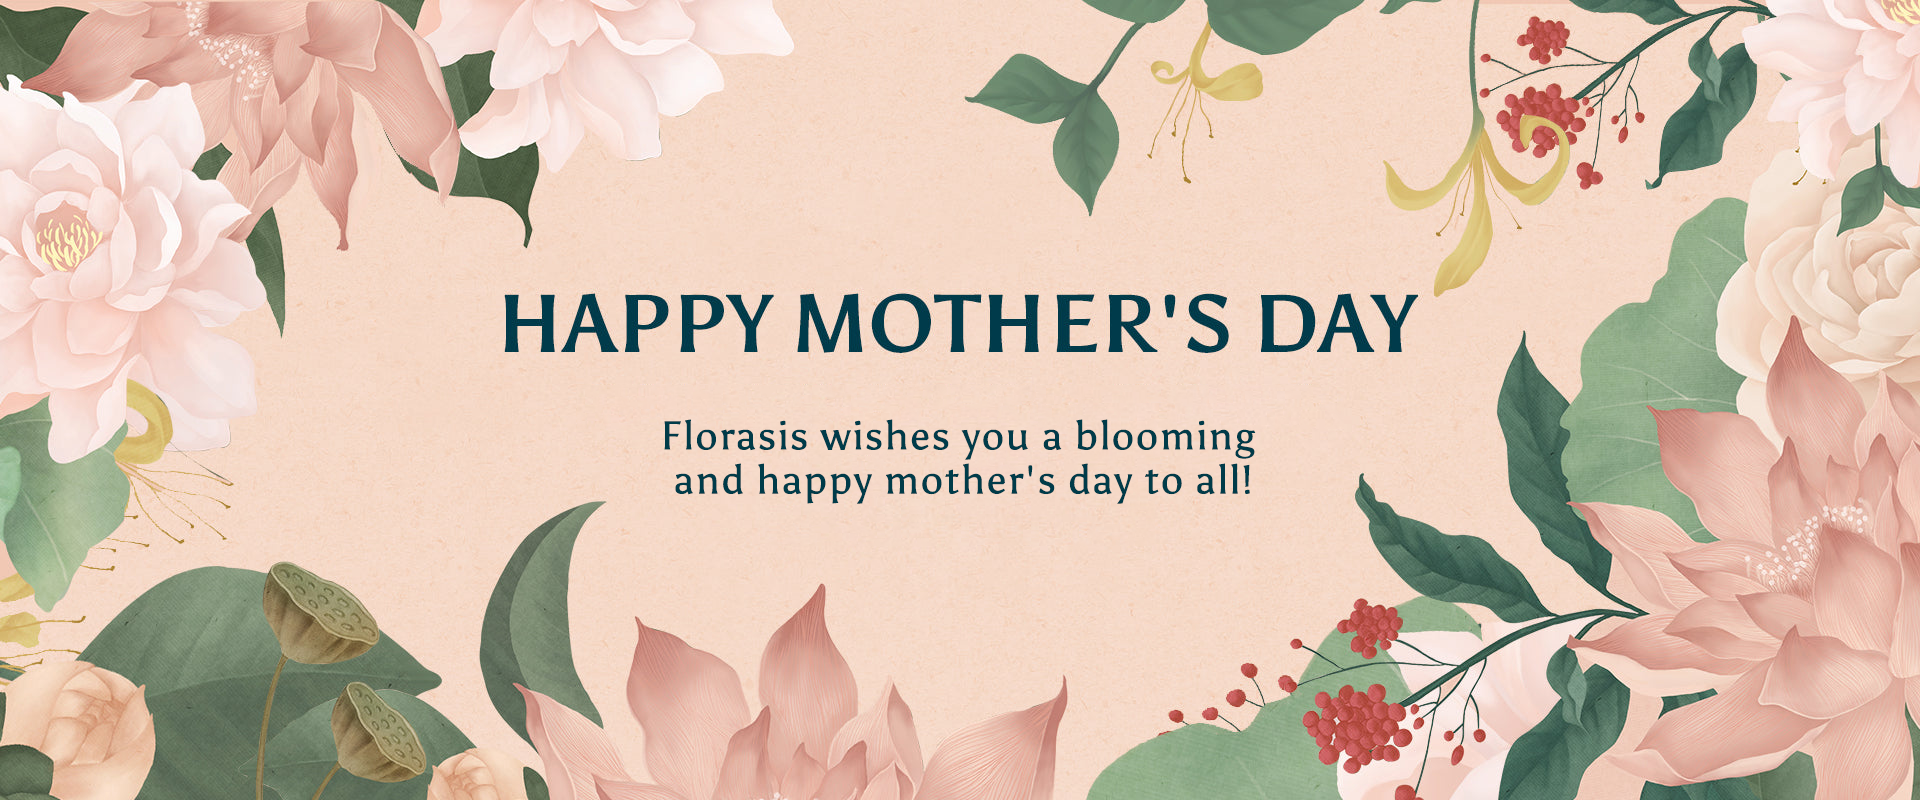 Celebrate Mother's Day with Florasis